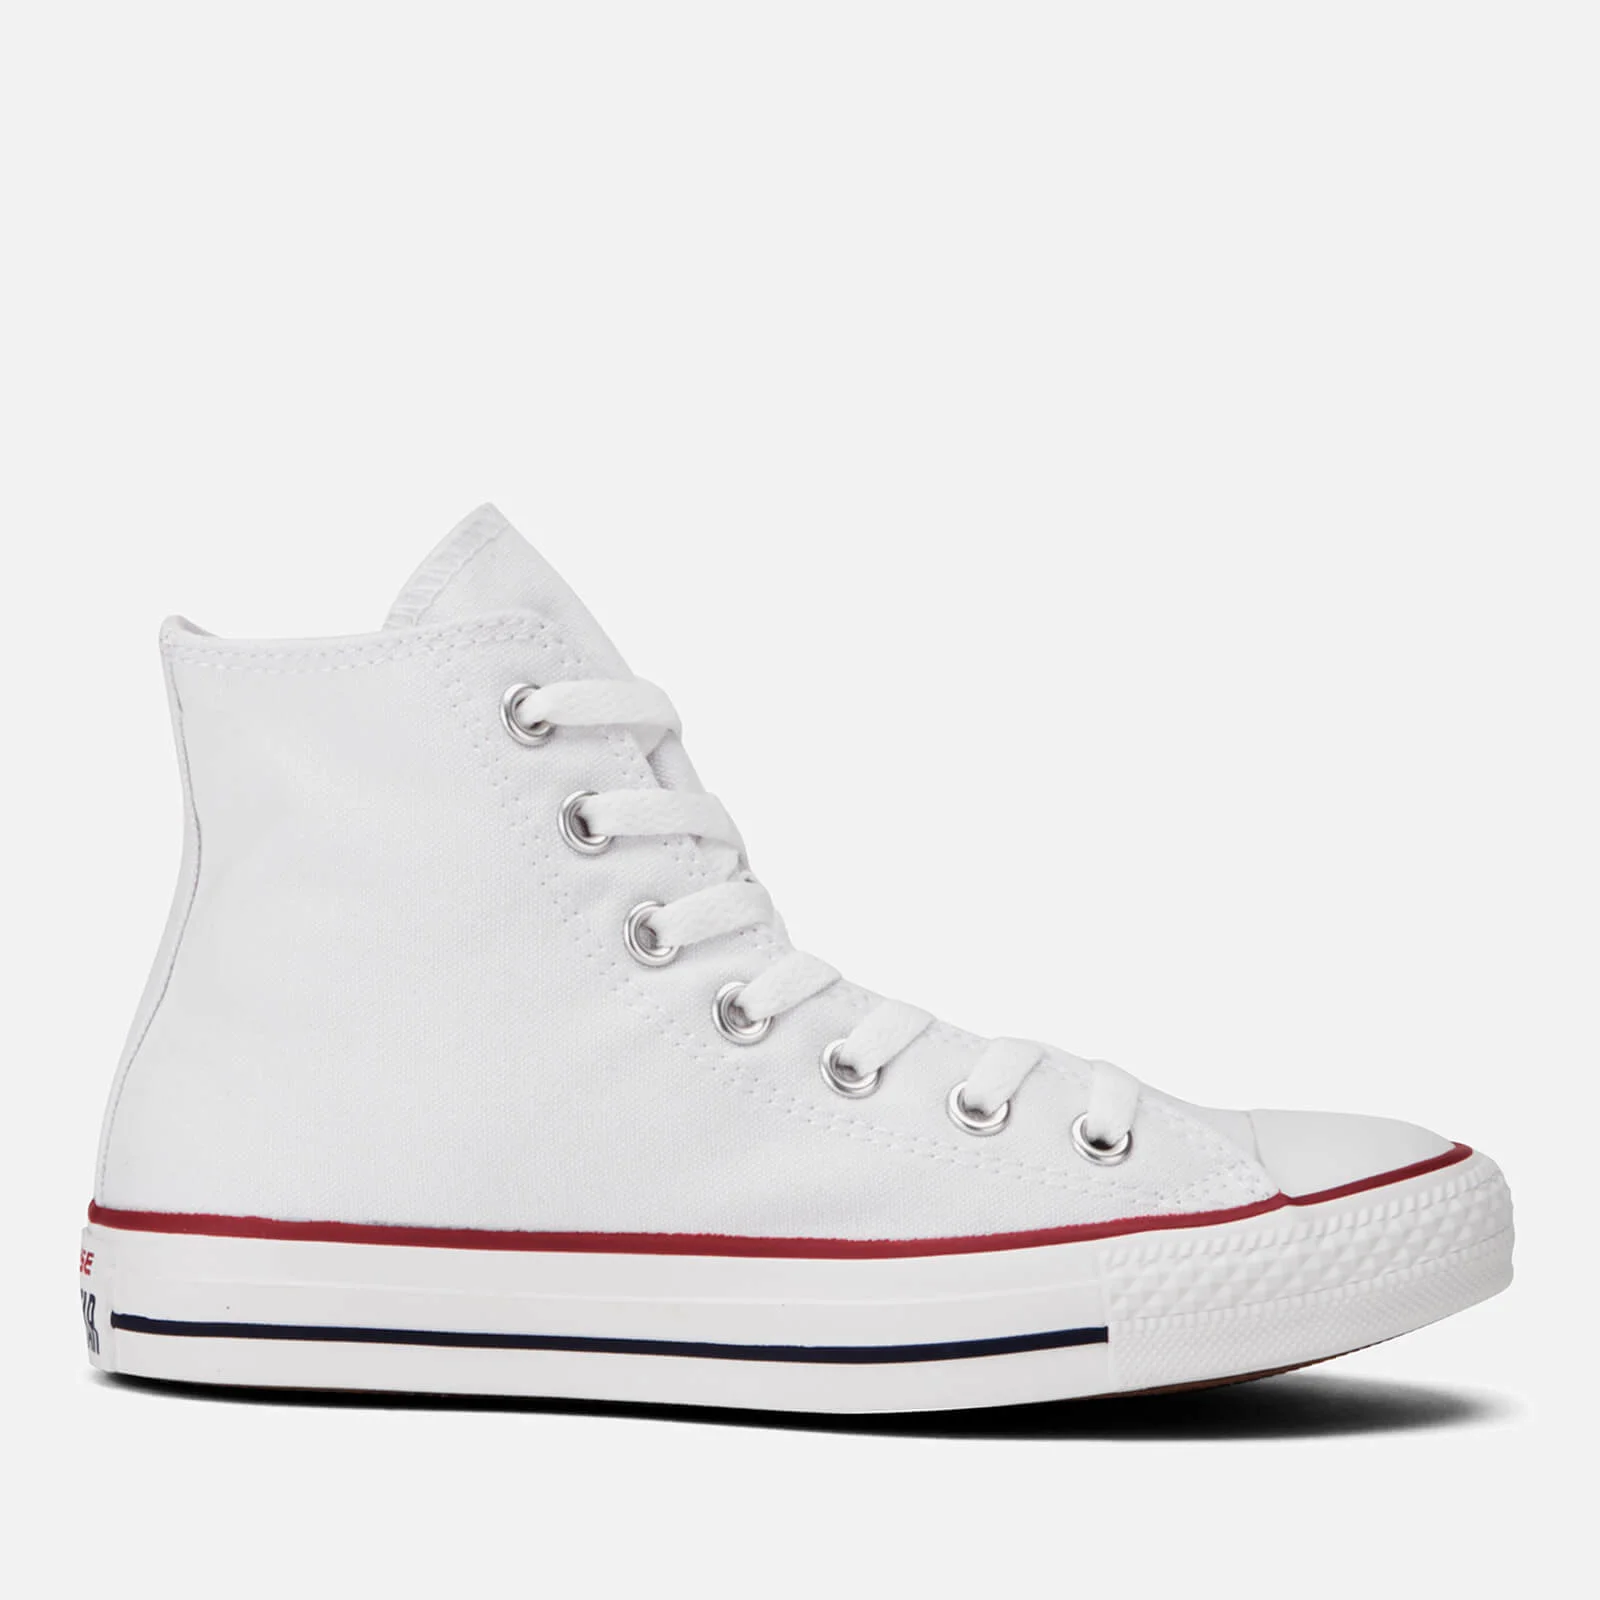 Converse Chuck Taylor All Star Hi-Top Trainers - Optical White Image 1